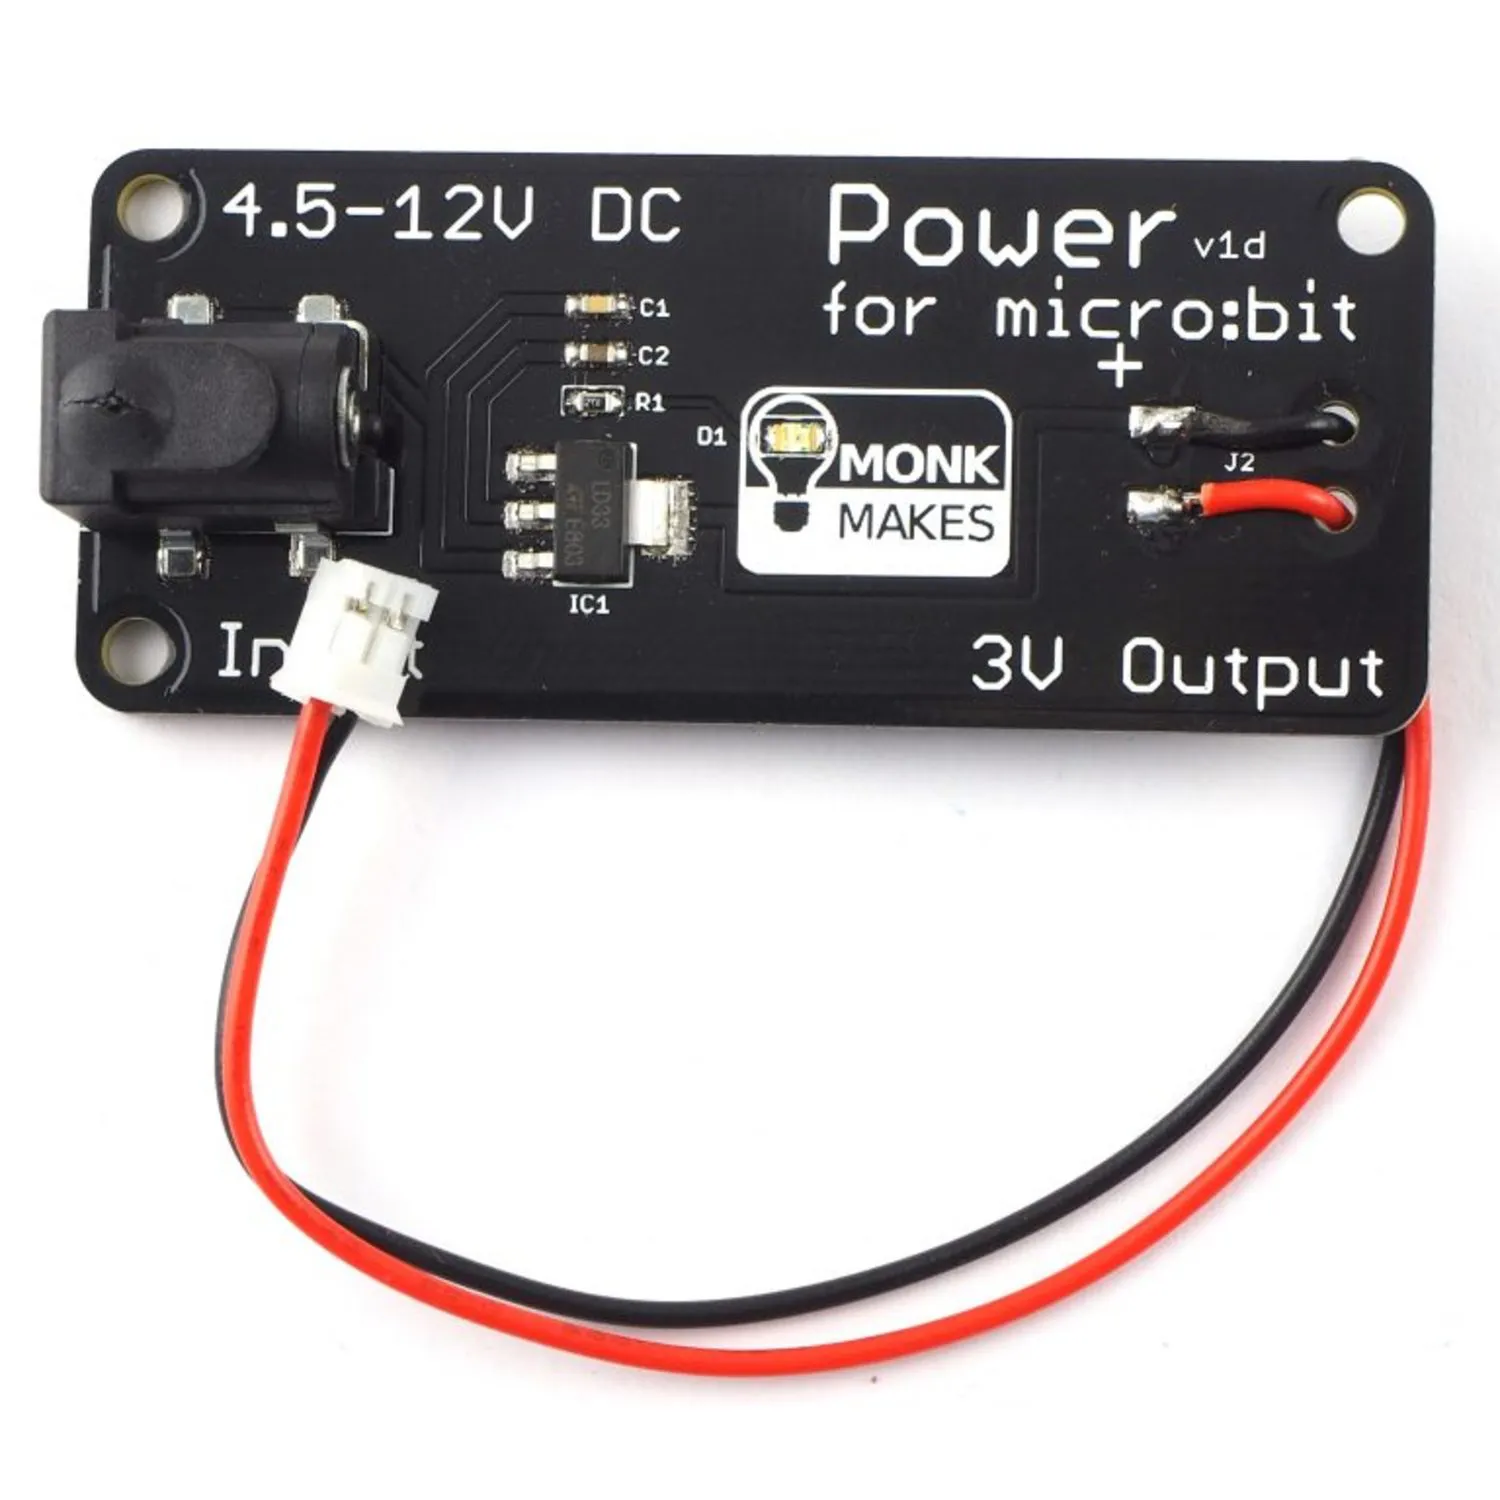 Photo of Power for micro:bit by Monk Makes